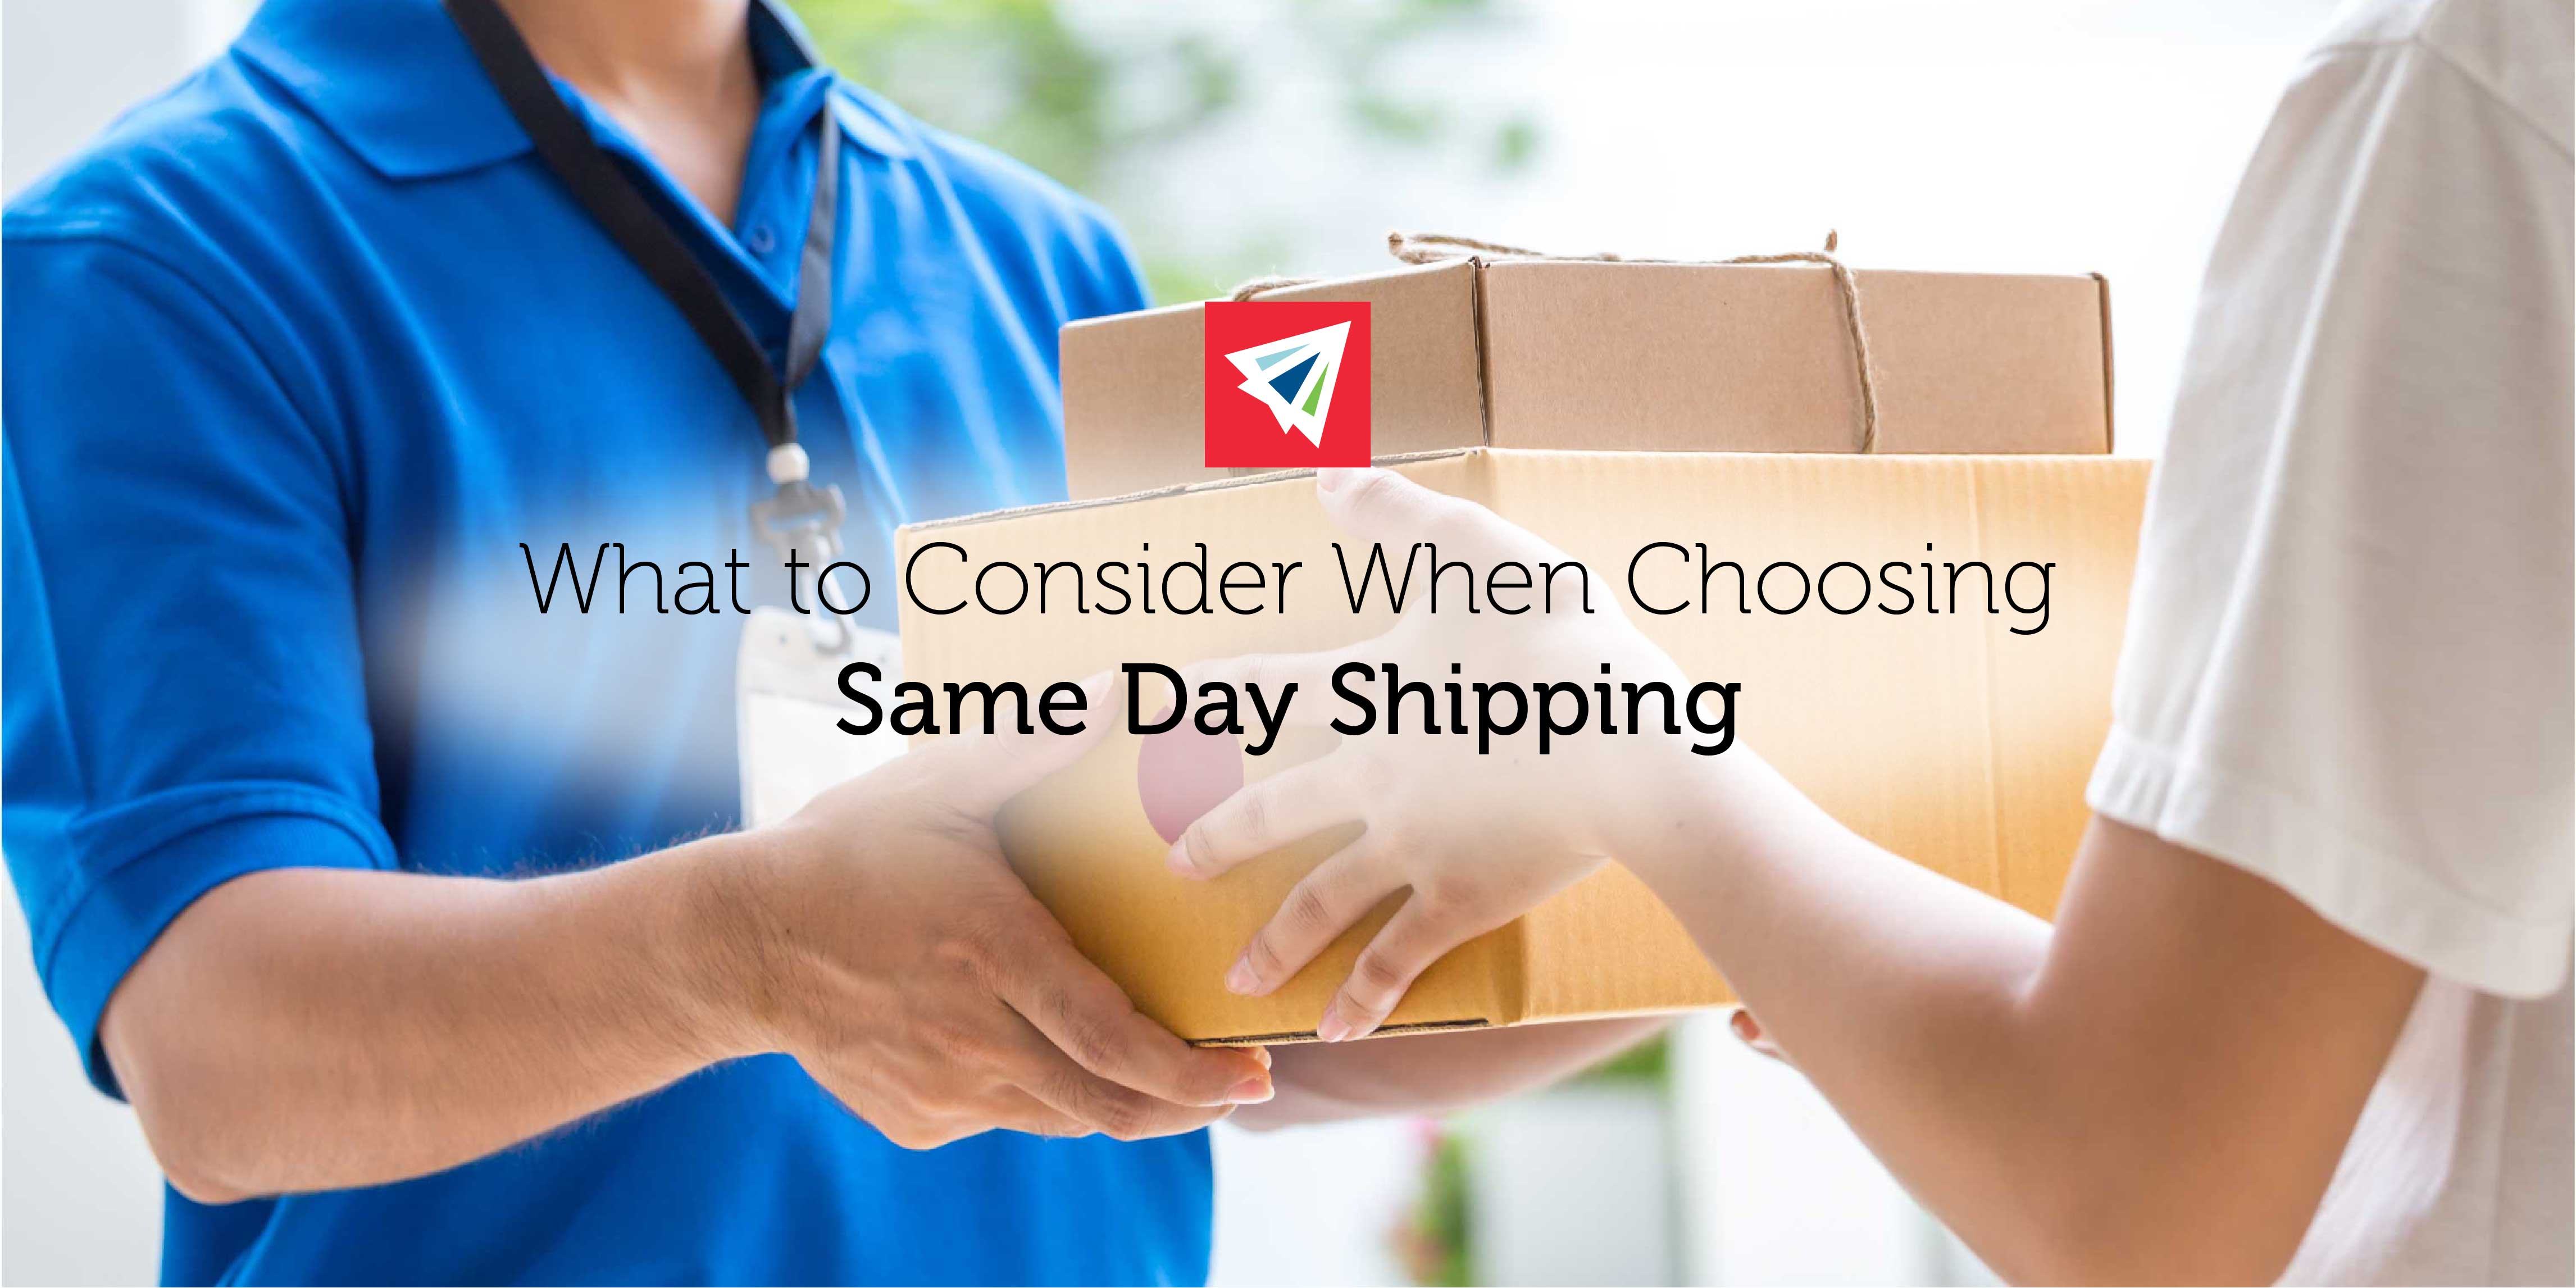 same day delivery mattress canada